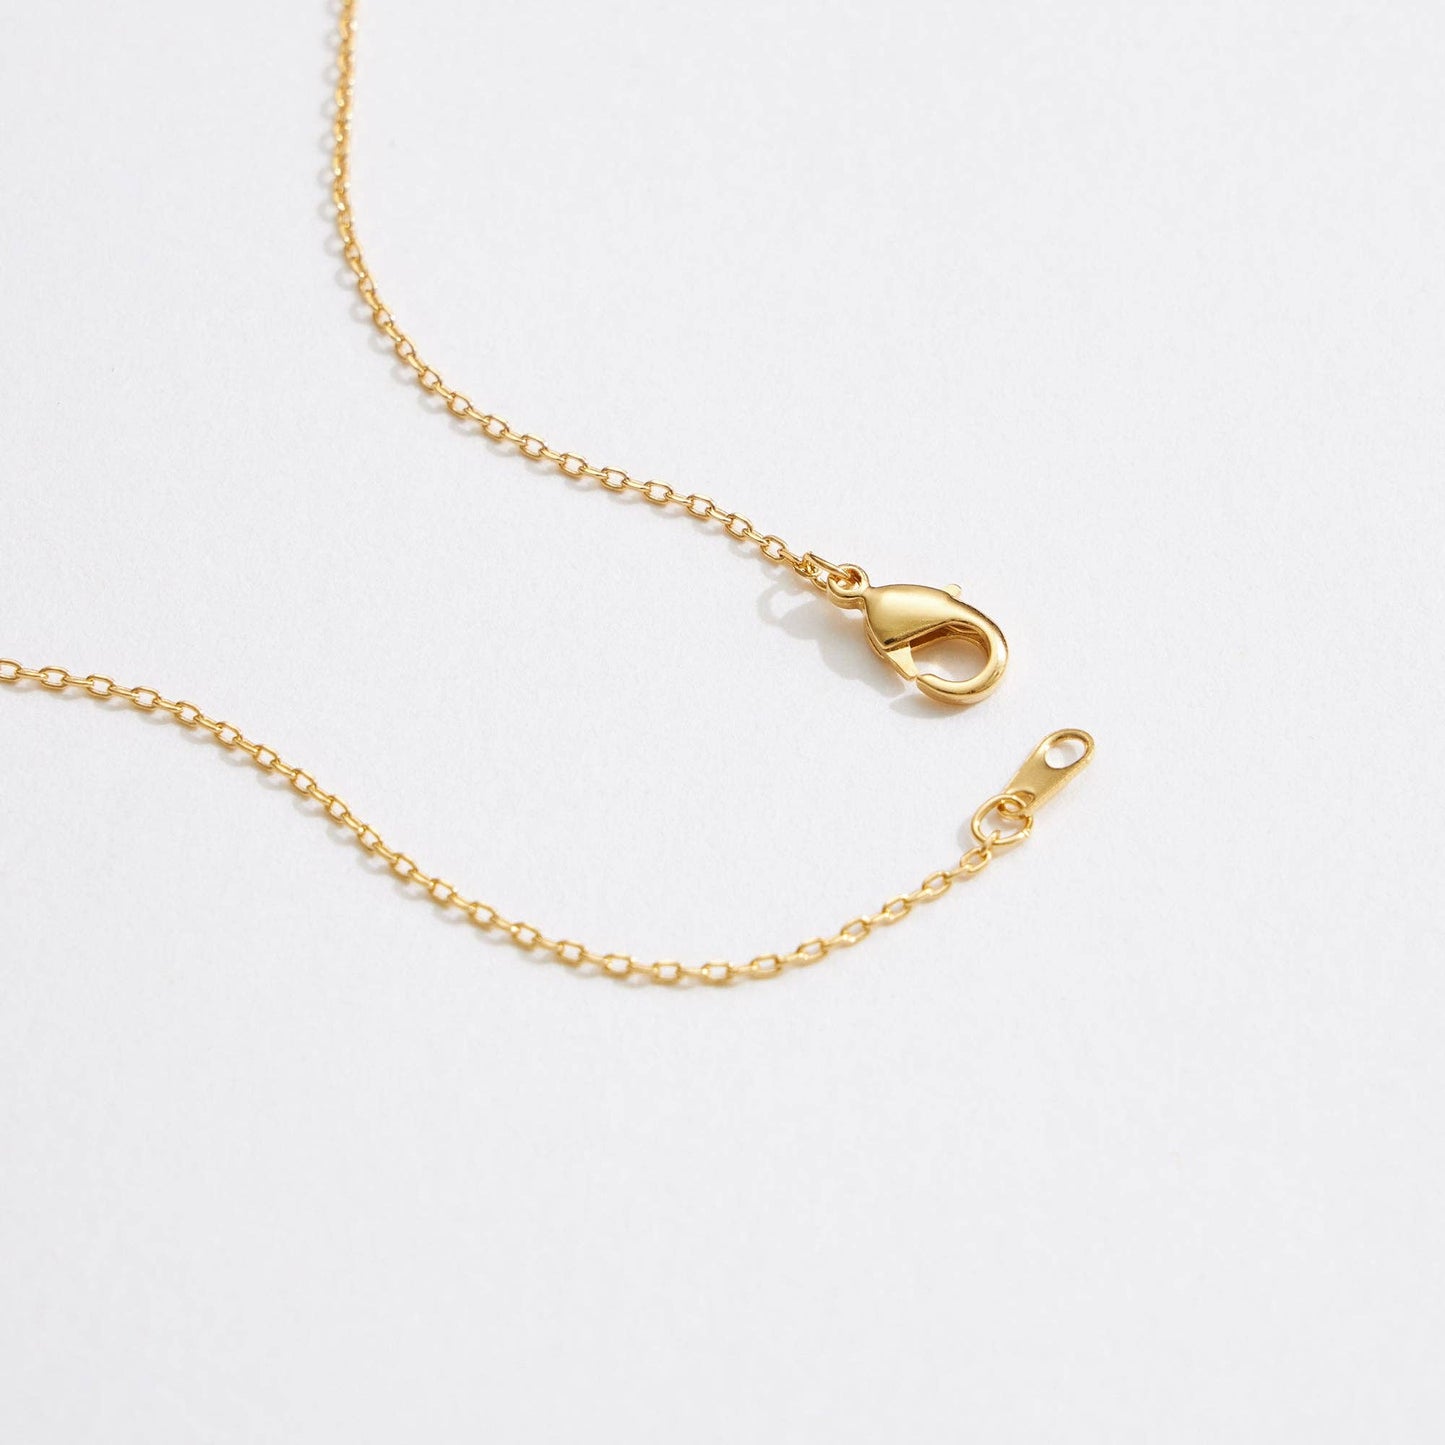 Gold Dipped CZ Triple Stars Necklace